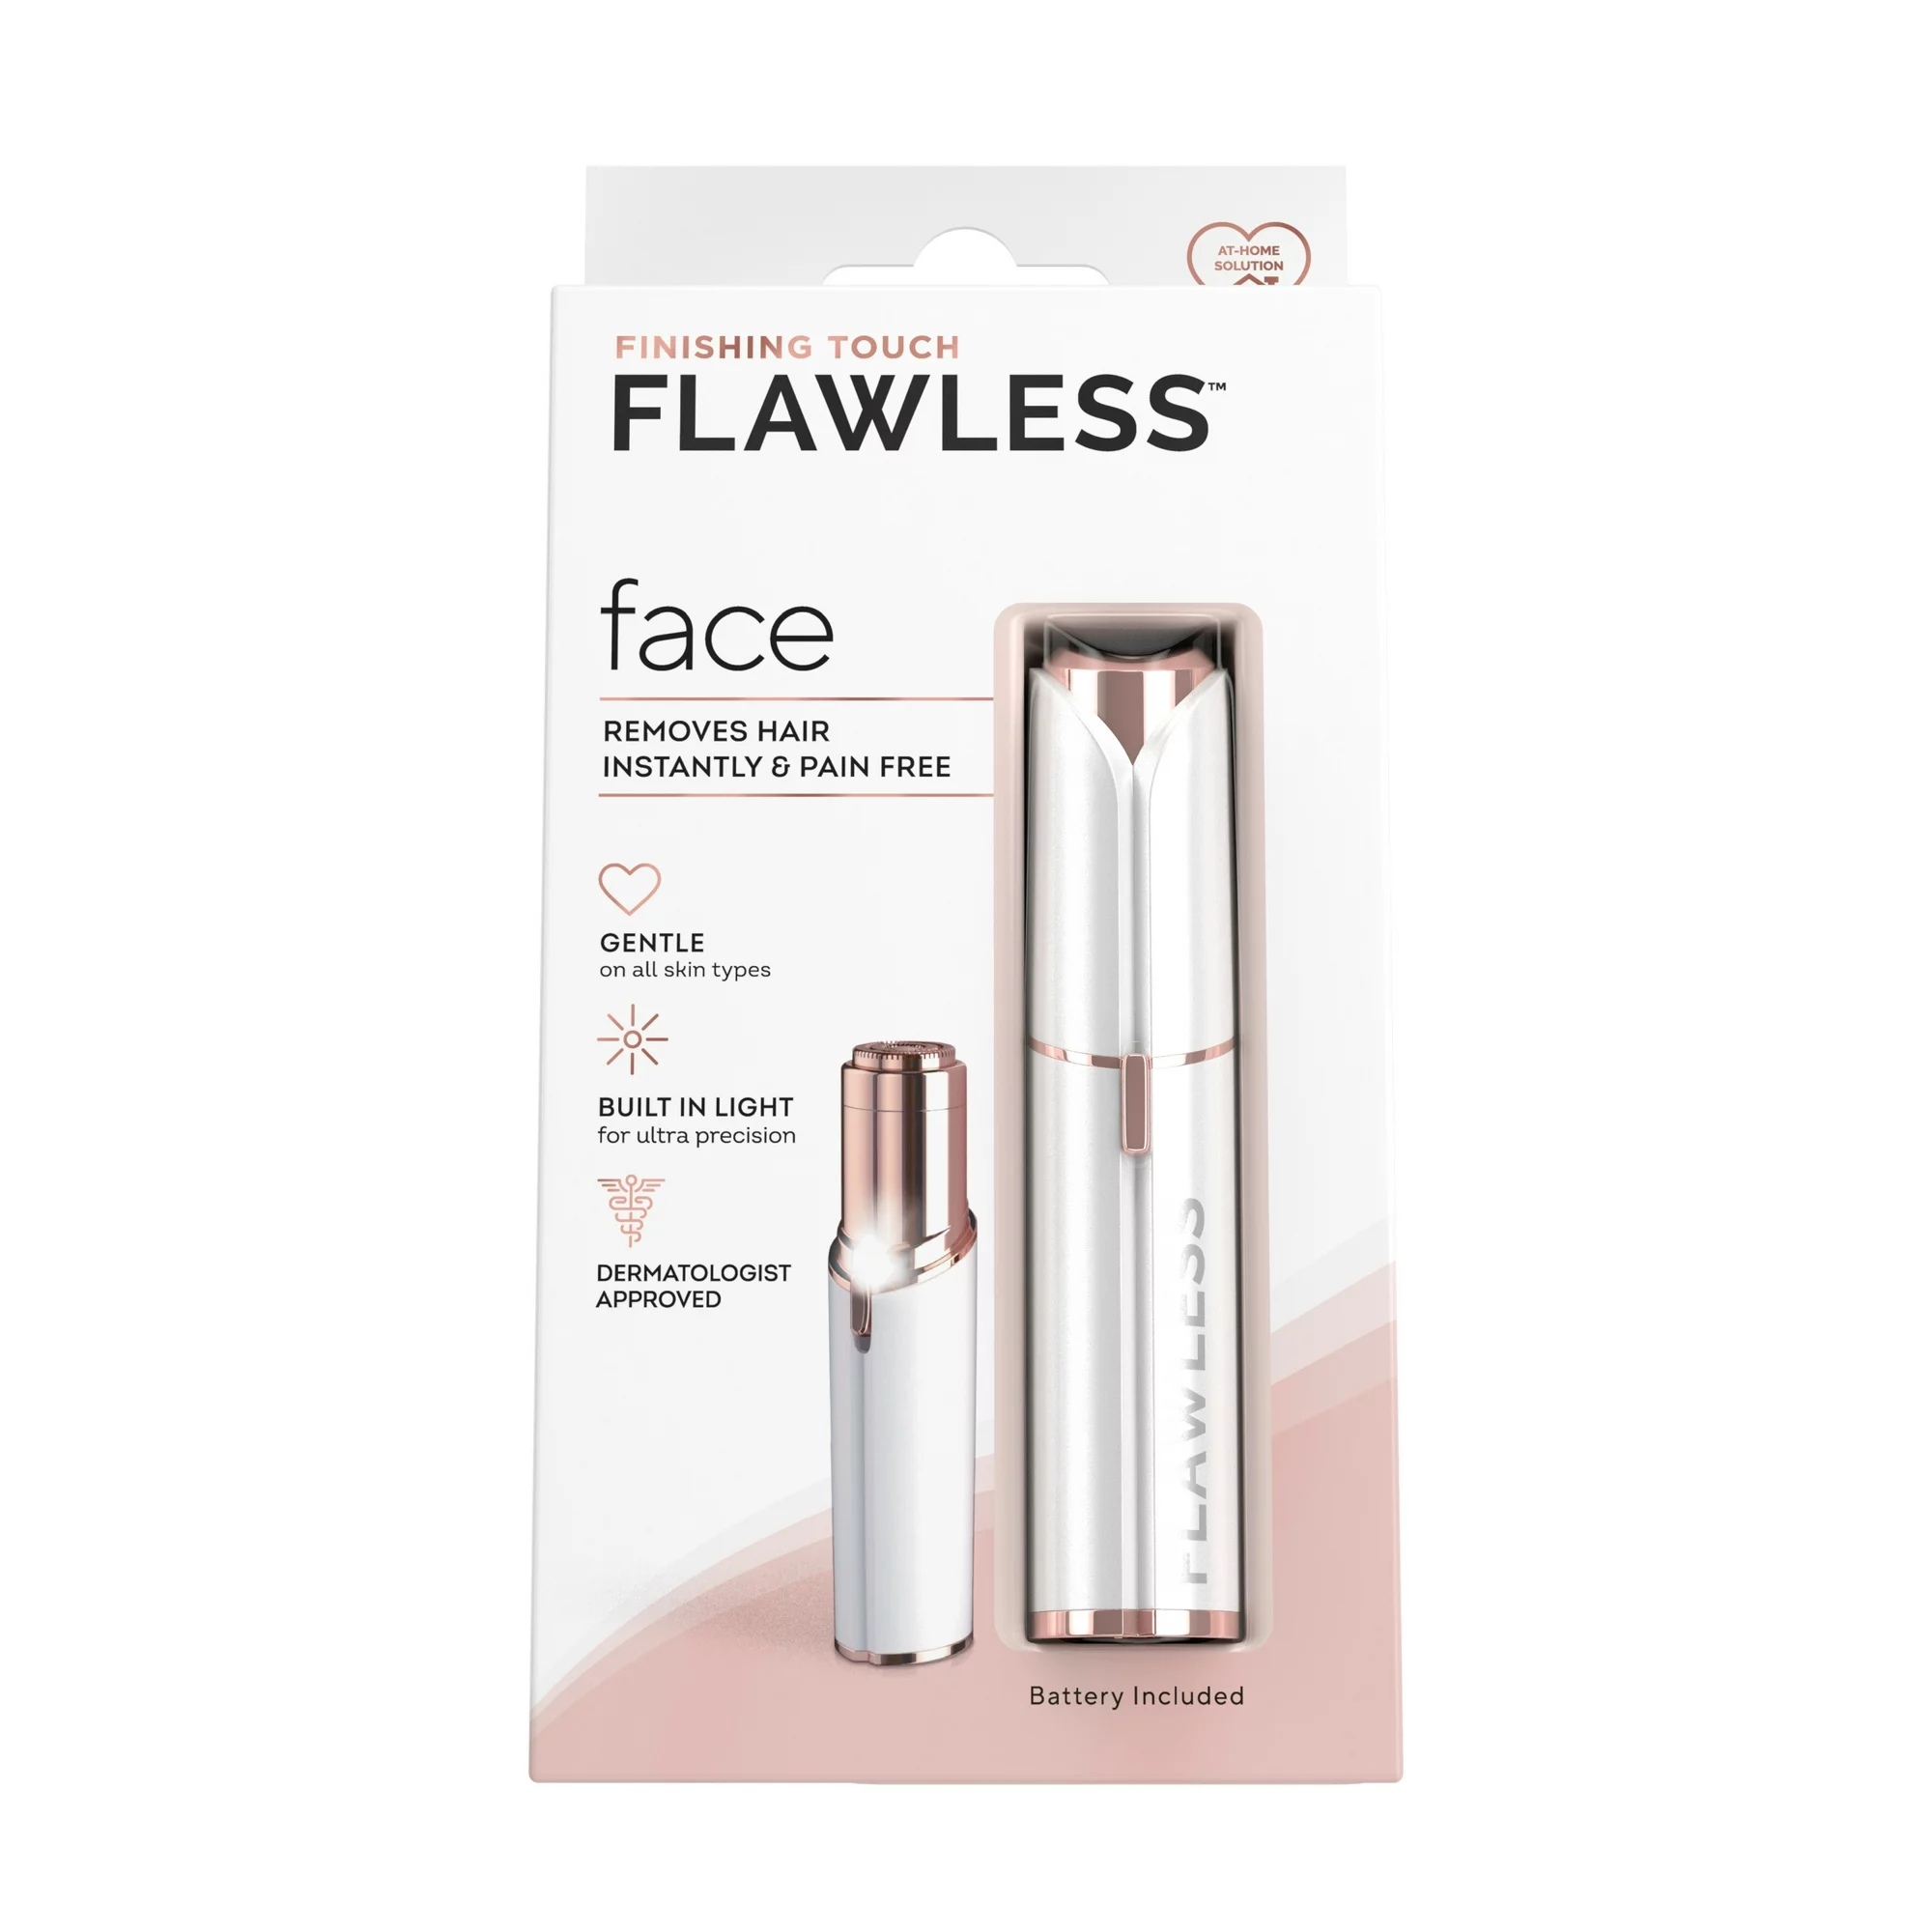 Replacement Heads for Flawless Facial Hair Remover,Replacement Blades for  Finishing Touch Flawless Gen 2 Hair Removal